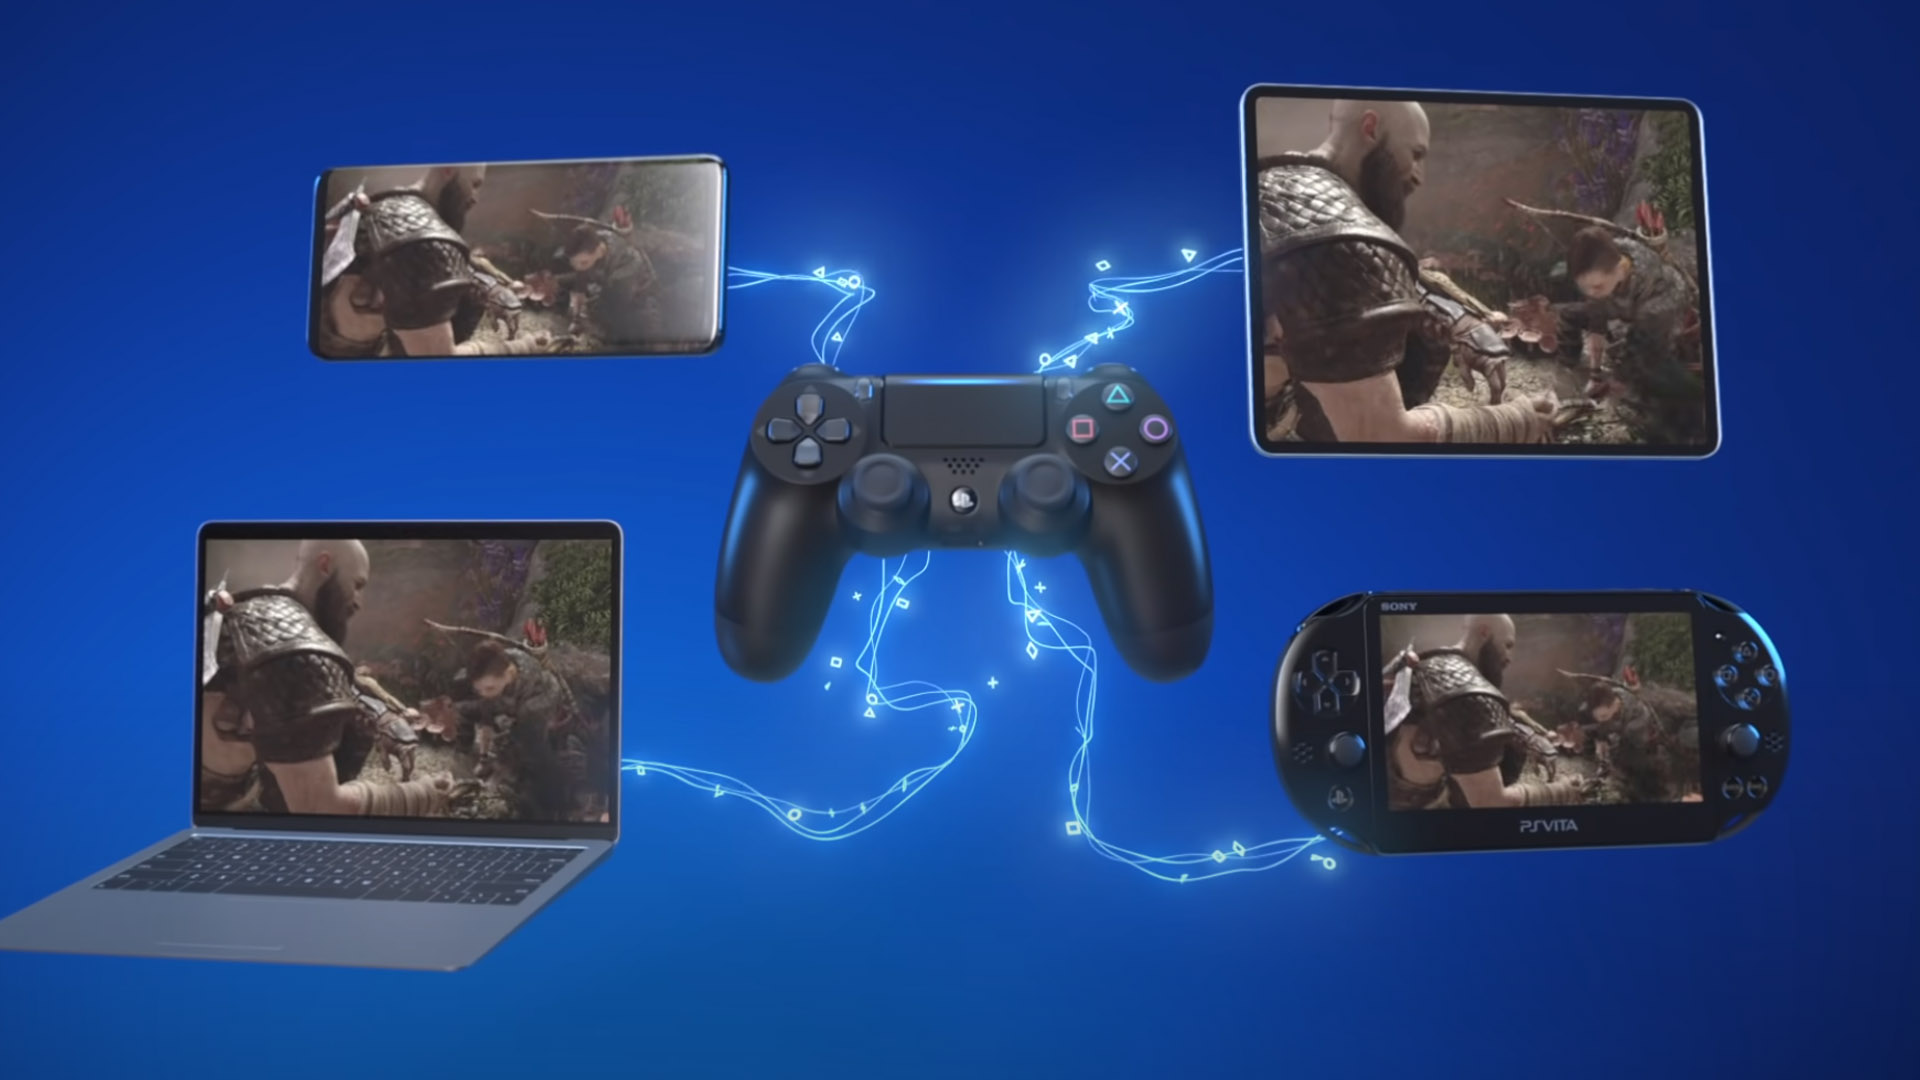 ps5 remote play